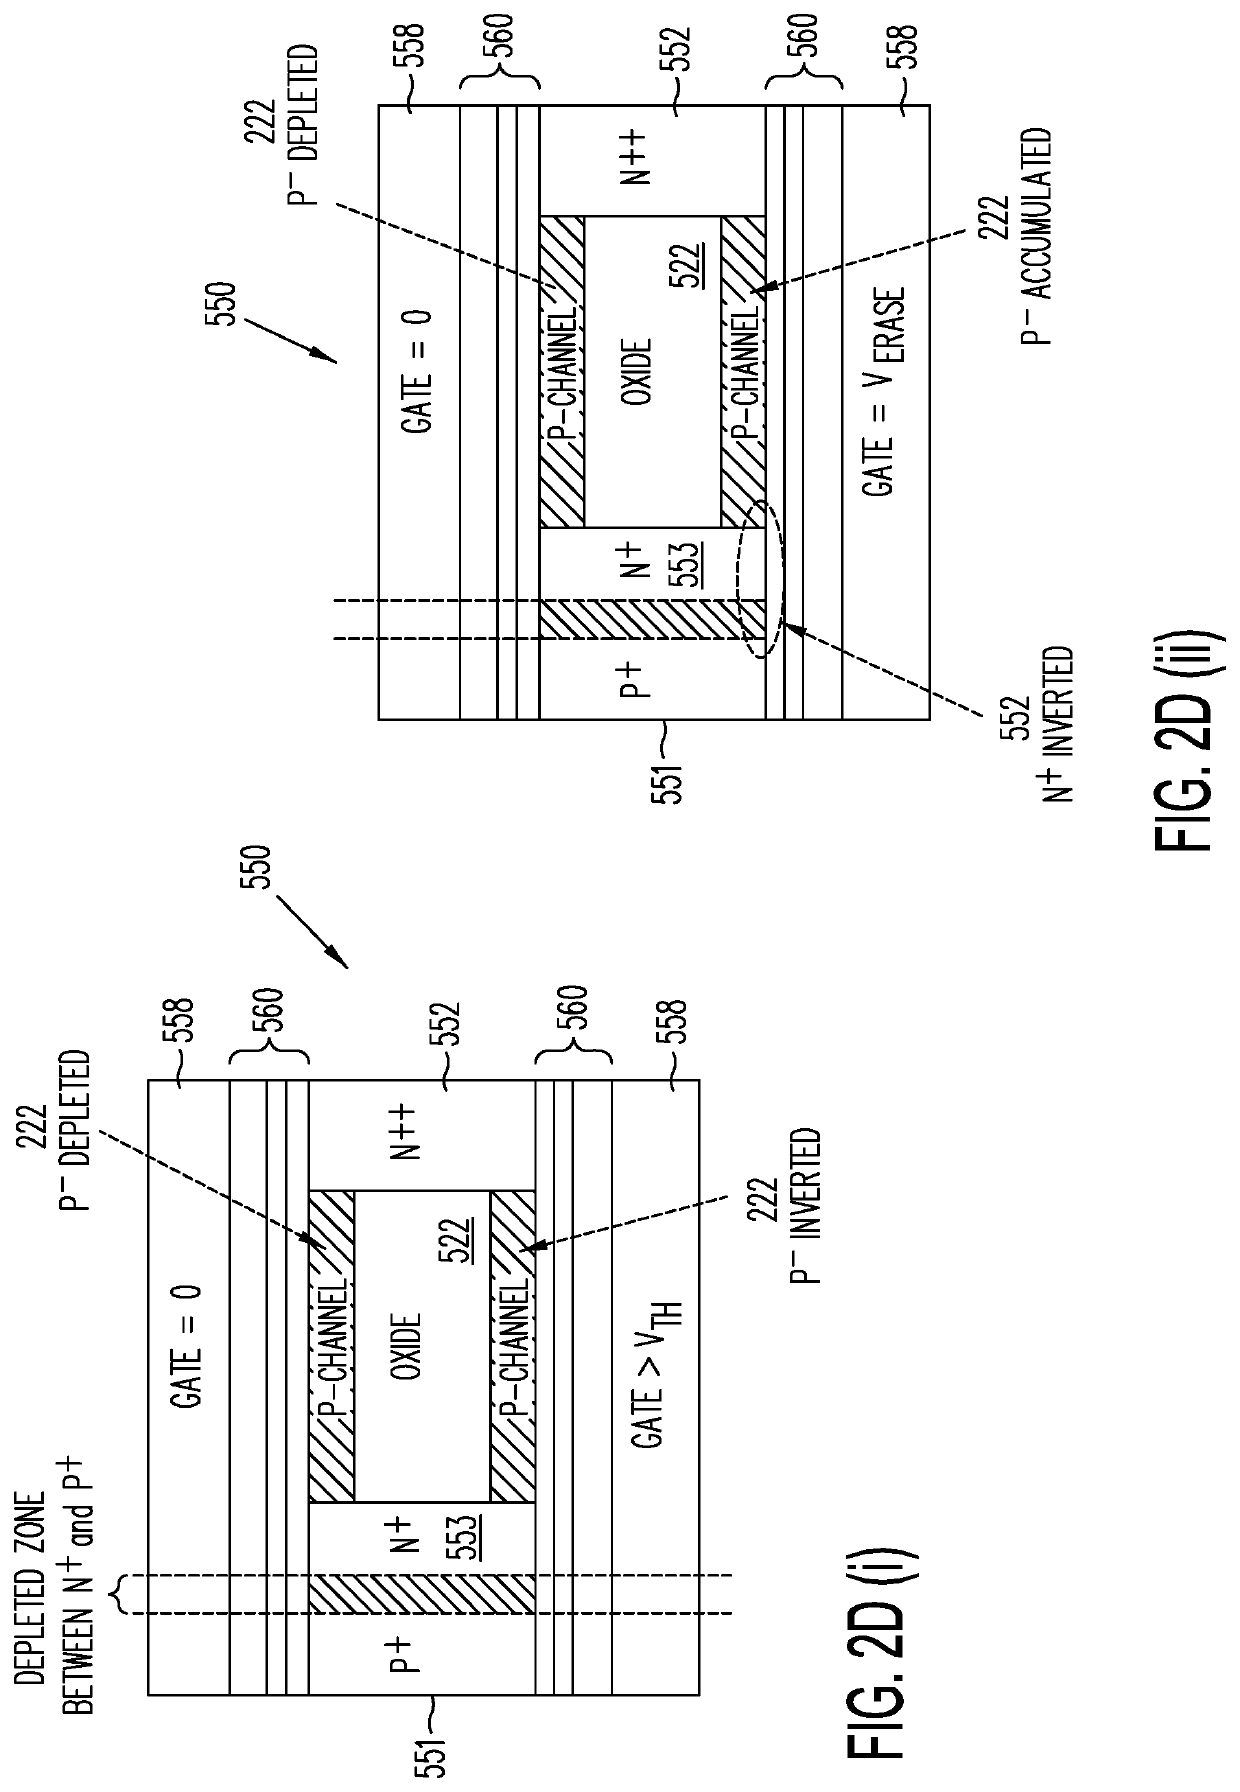 Device Structure for a 3-Dimensional NOR Memory Array and Methods for Improved Erase Operations Applied Thereto